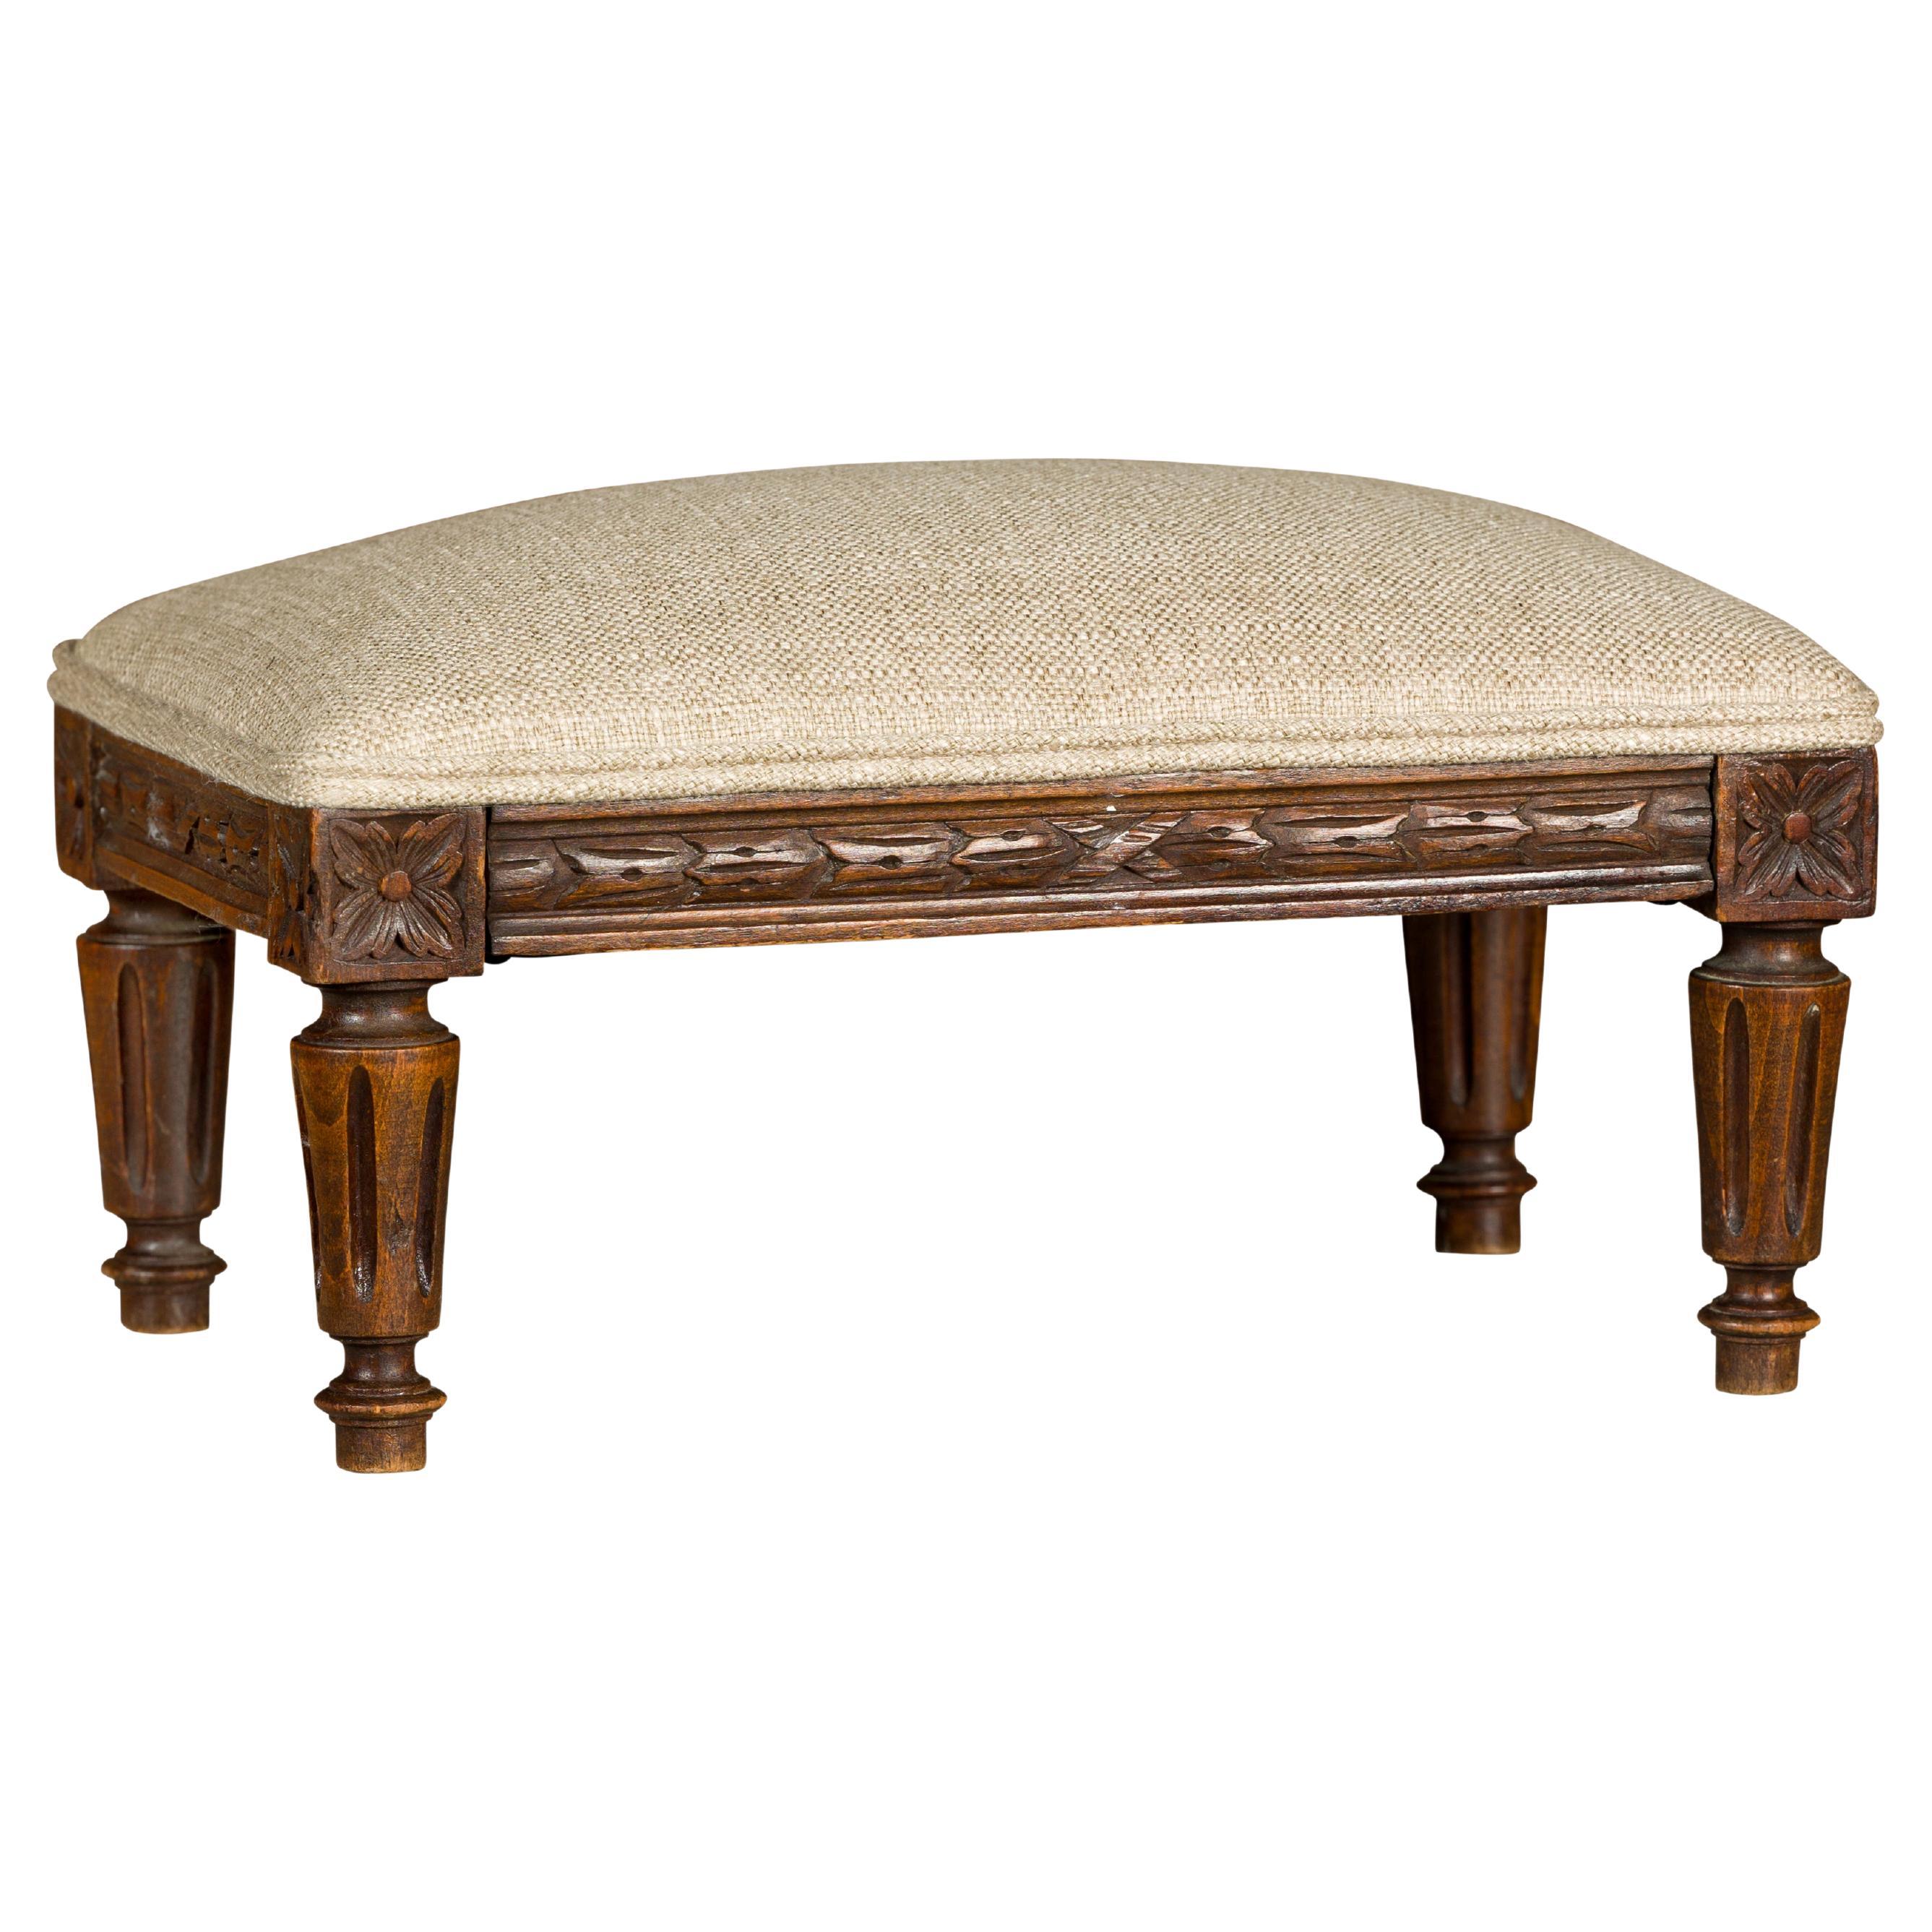 French Louis XVI Style 19th Century Footstool with Carved Décor and Fluted Legs For Sale